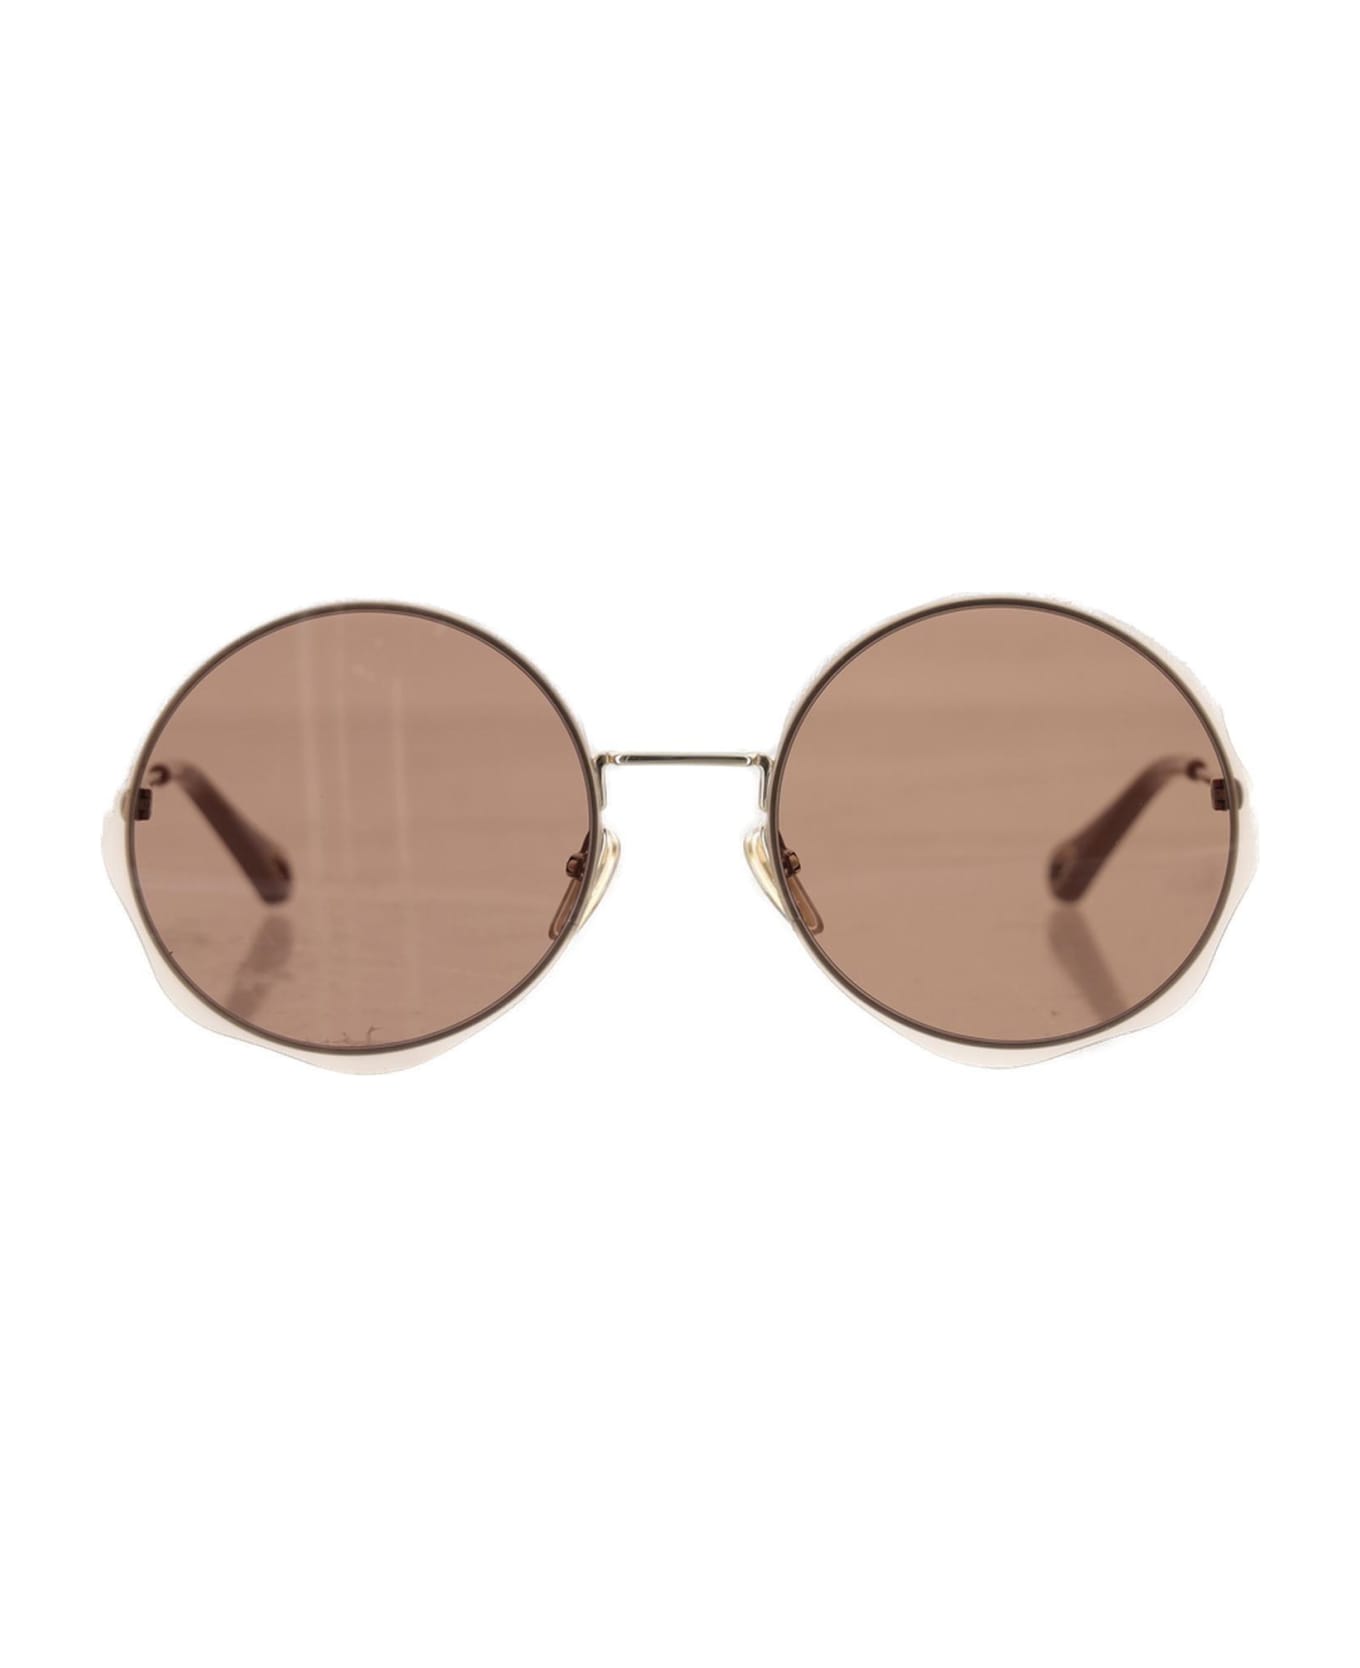 Chloé Honore Sunglasses - Gold/brown